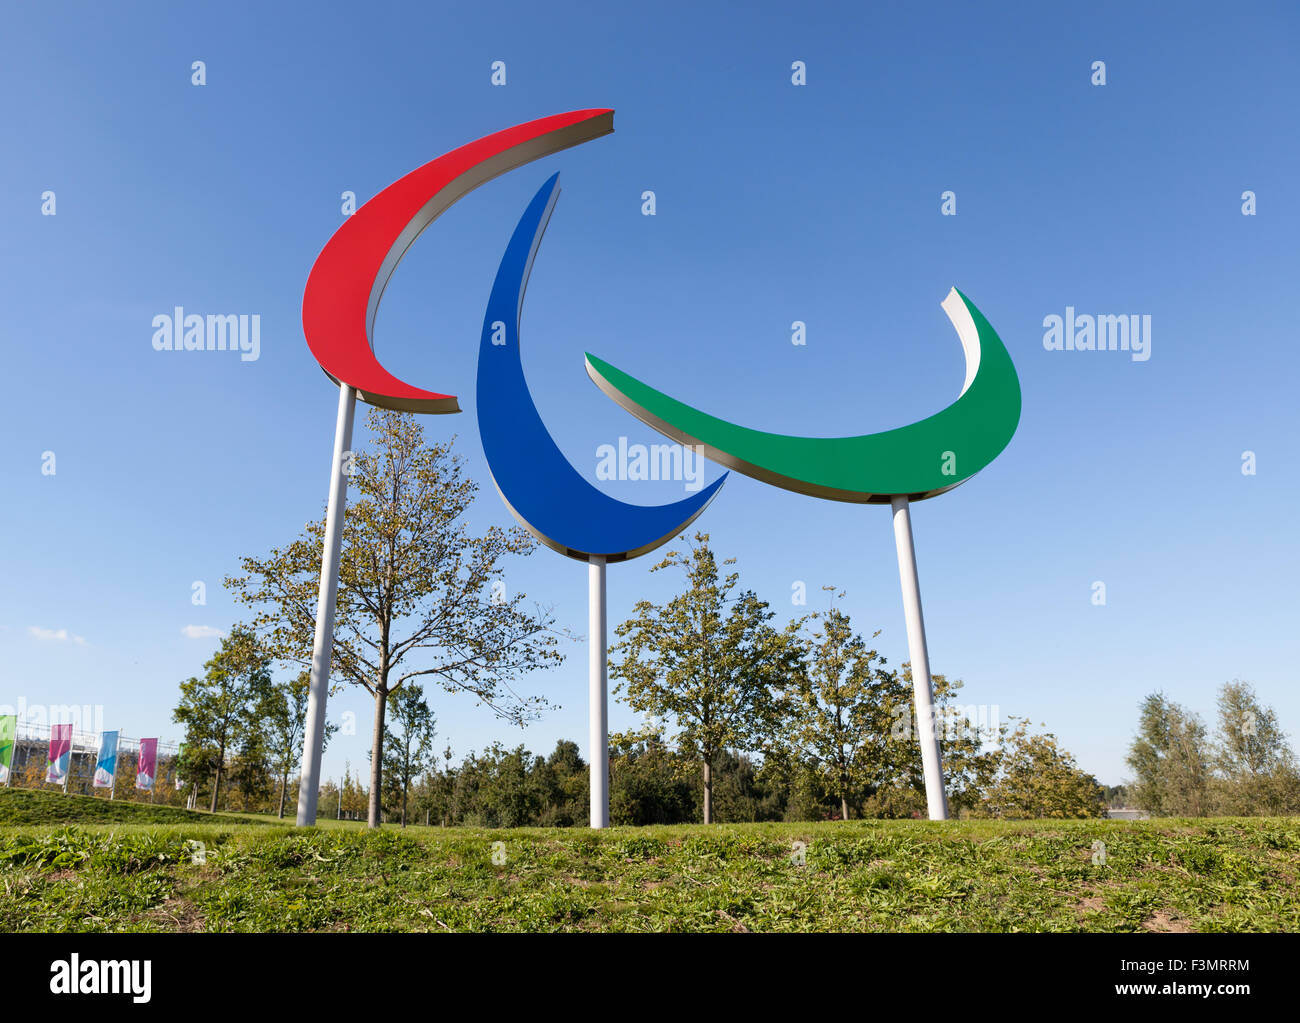 The Paralympic Games symbol in Queen Elizabeth Olympic Park, a legacy from the 2012 games in London, UK. Stock Photo